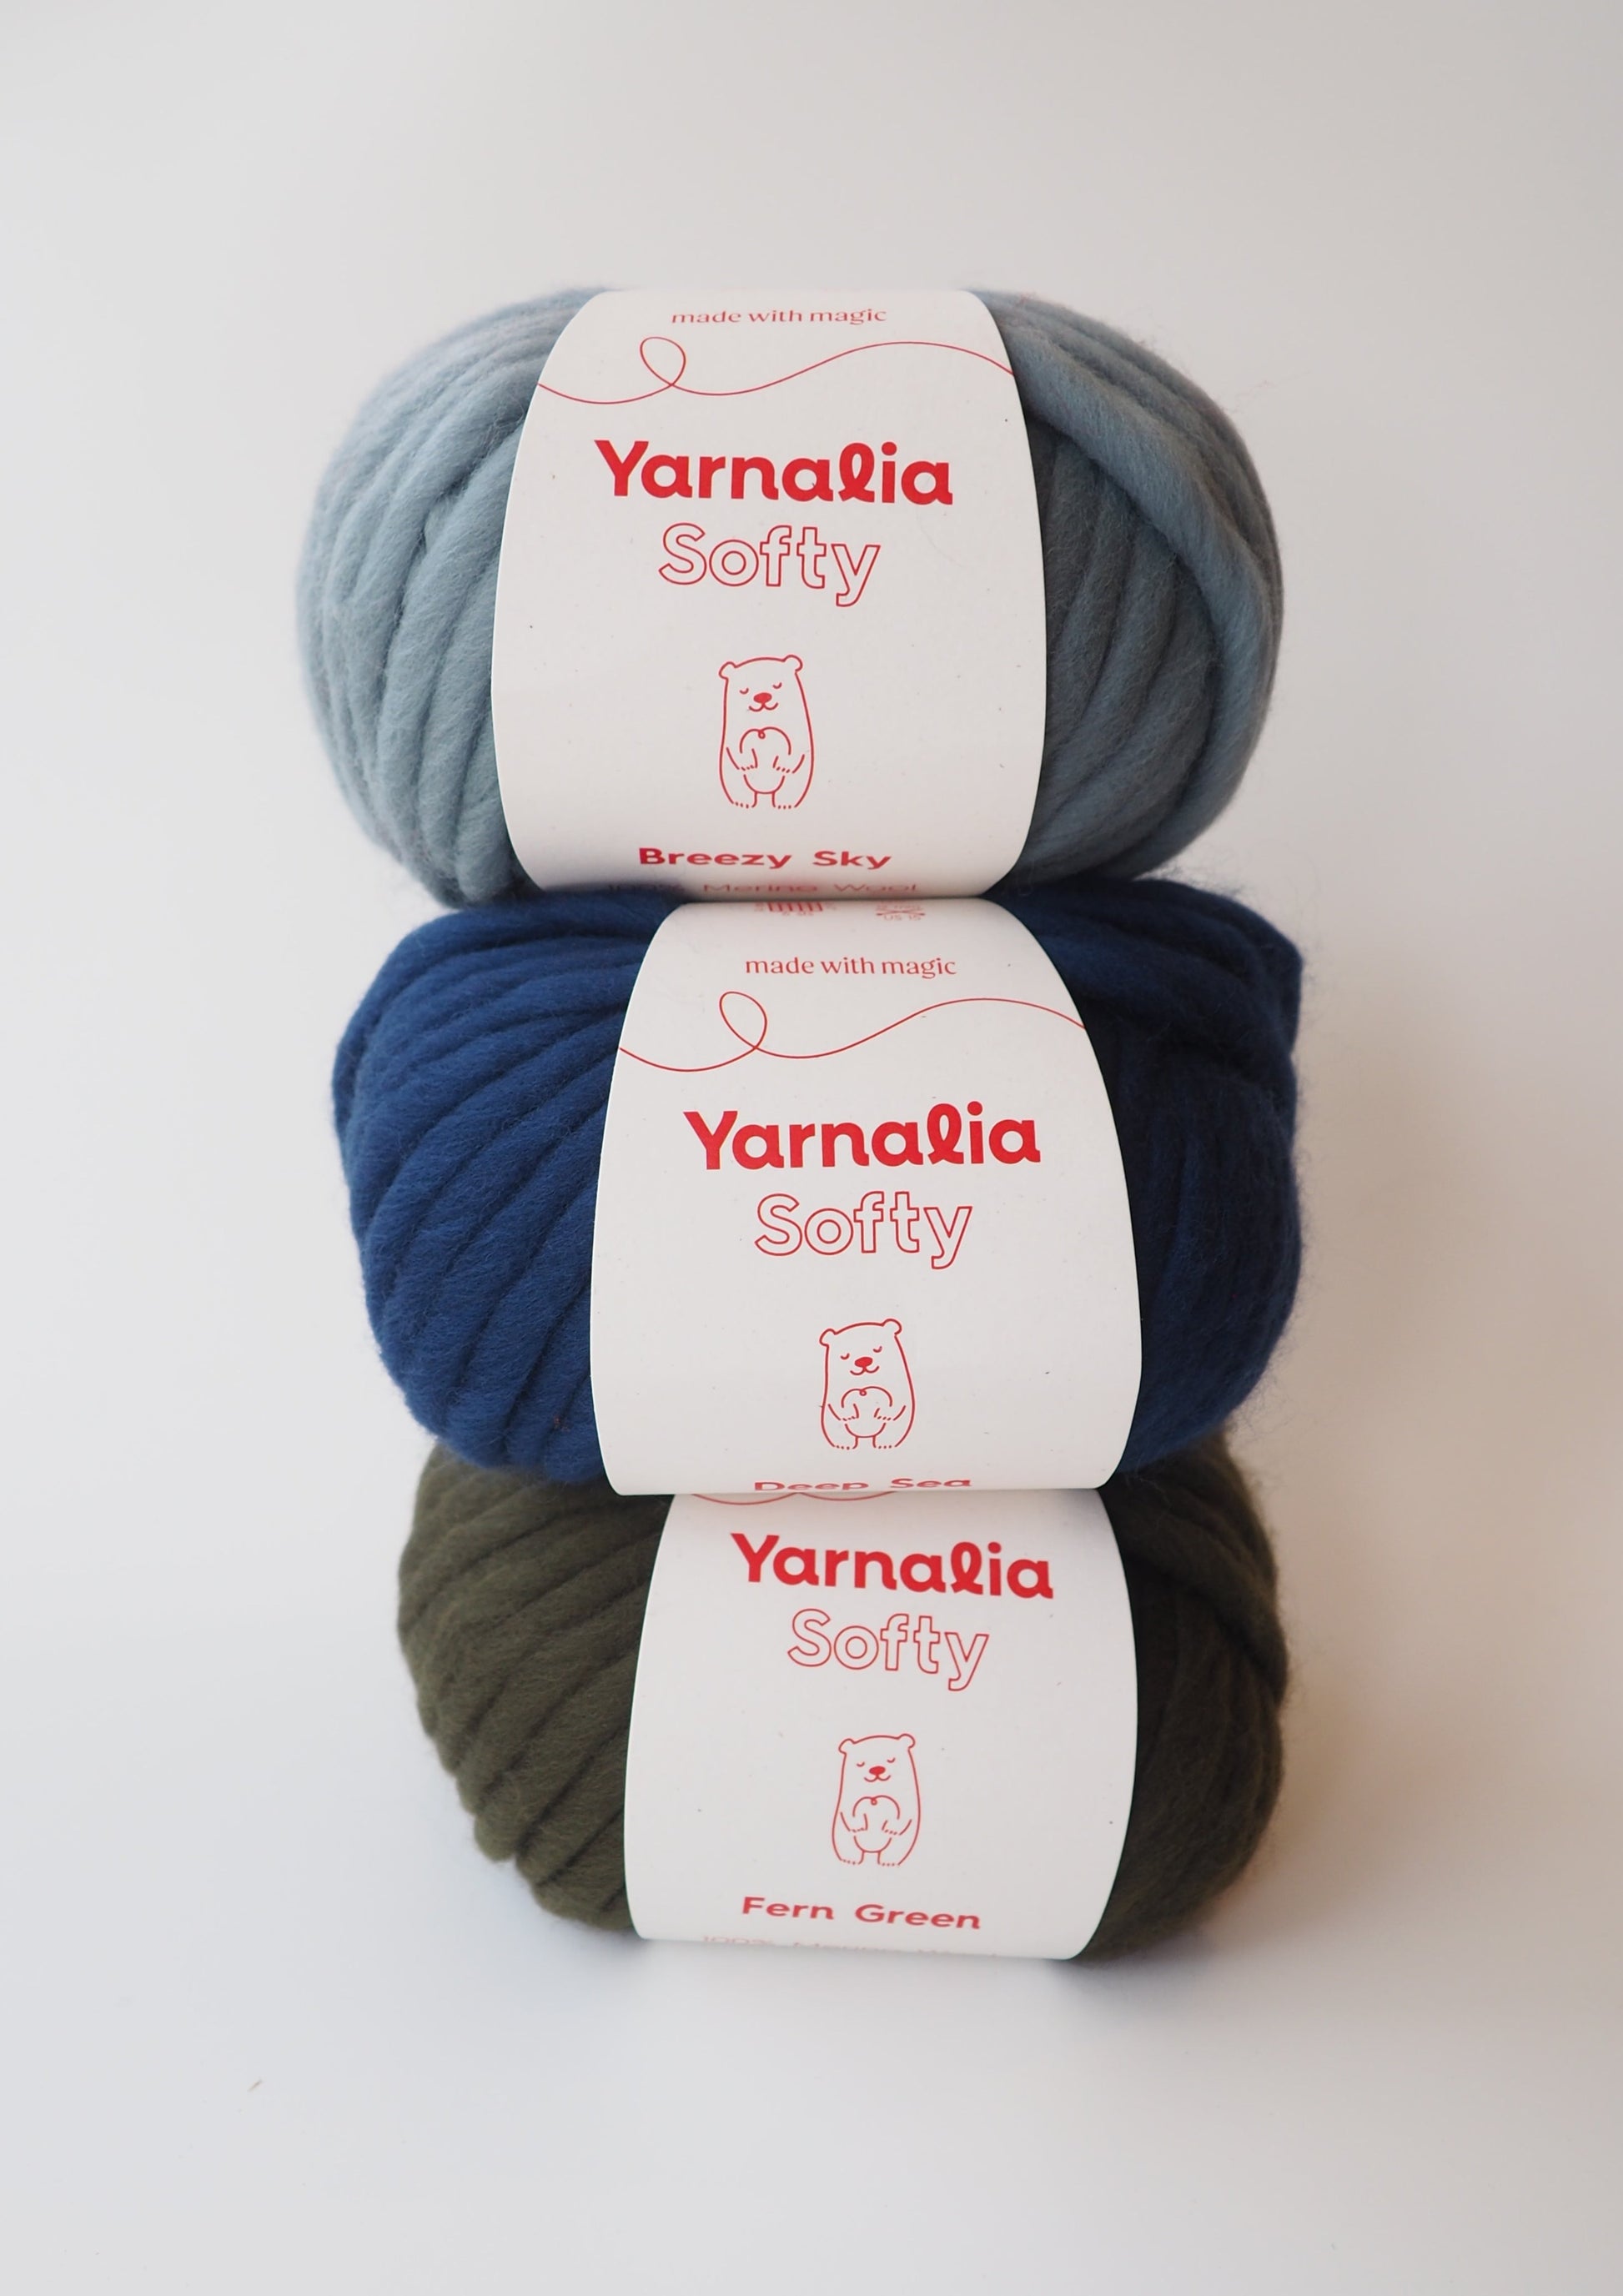 Yarnalia Softy Yarn: Three balls in light blue, dark blue, and olive colorways, showcasing the soft and squishy texture